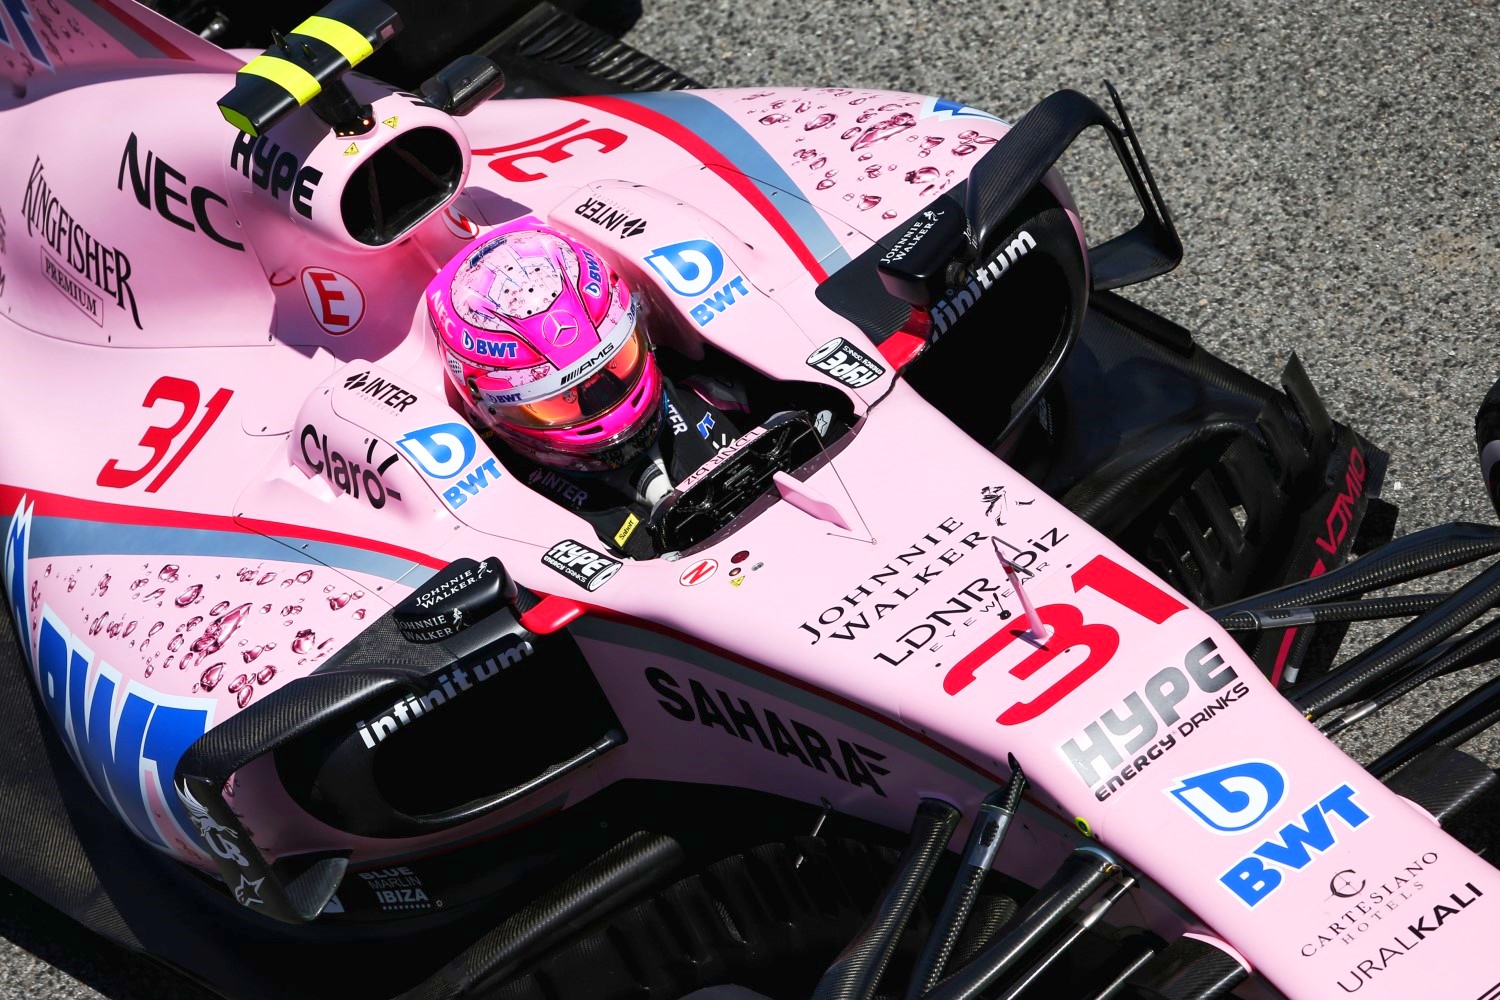 The Force India numbers in Barcelona were only visible if you were above the car